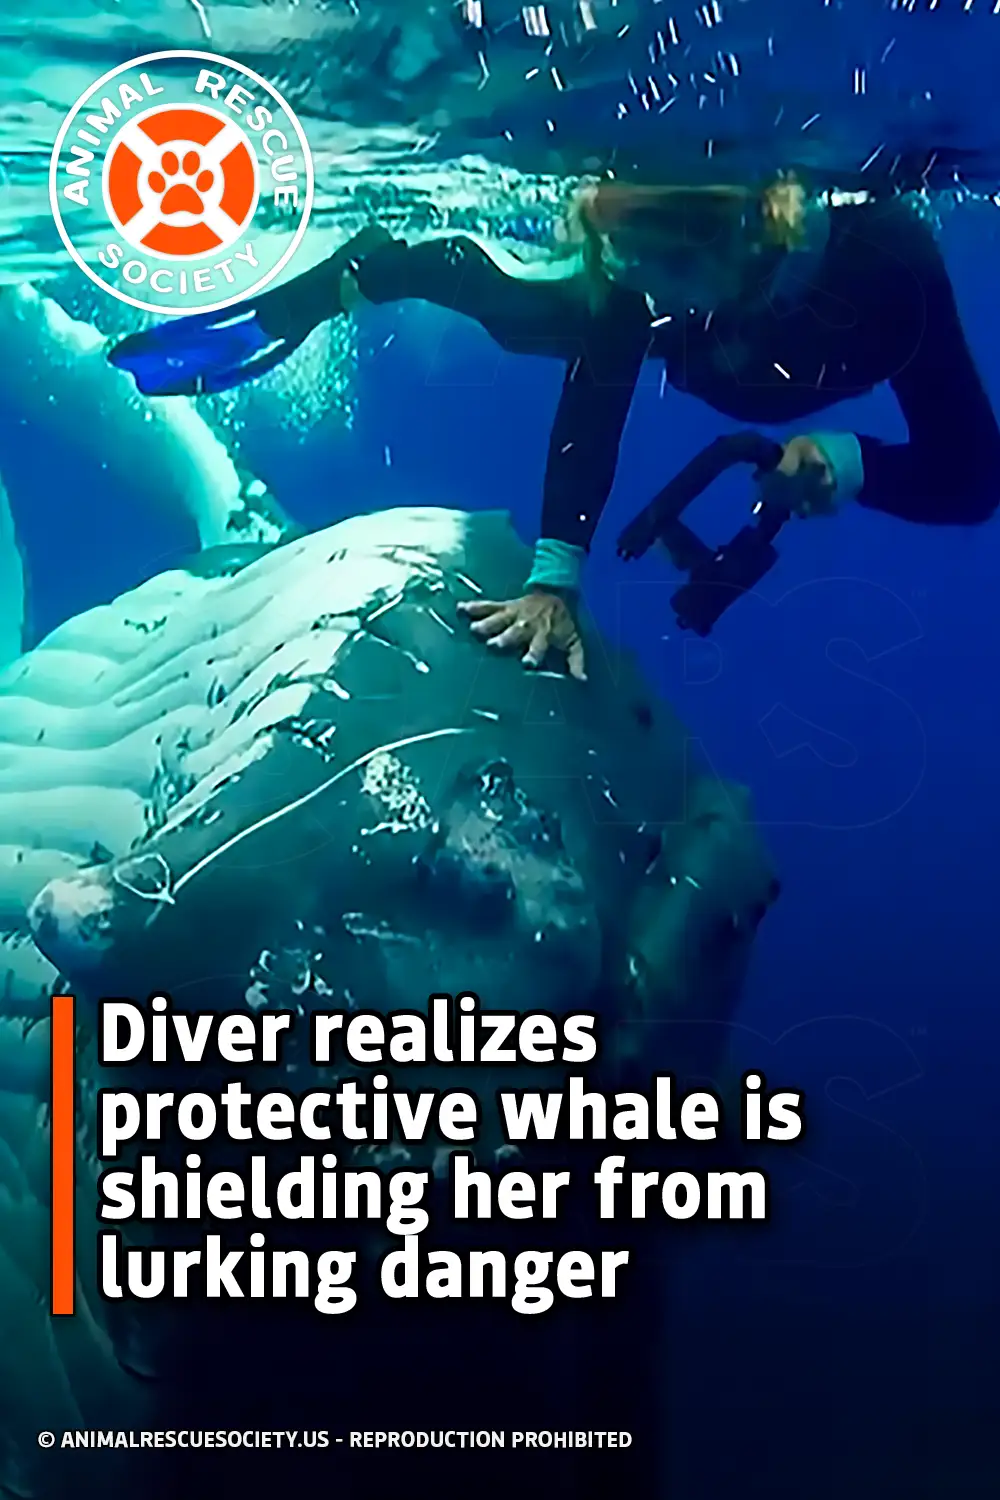 Diver realizes protective whale is shielding her from lurking danger